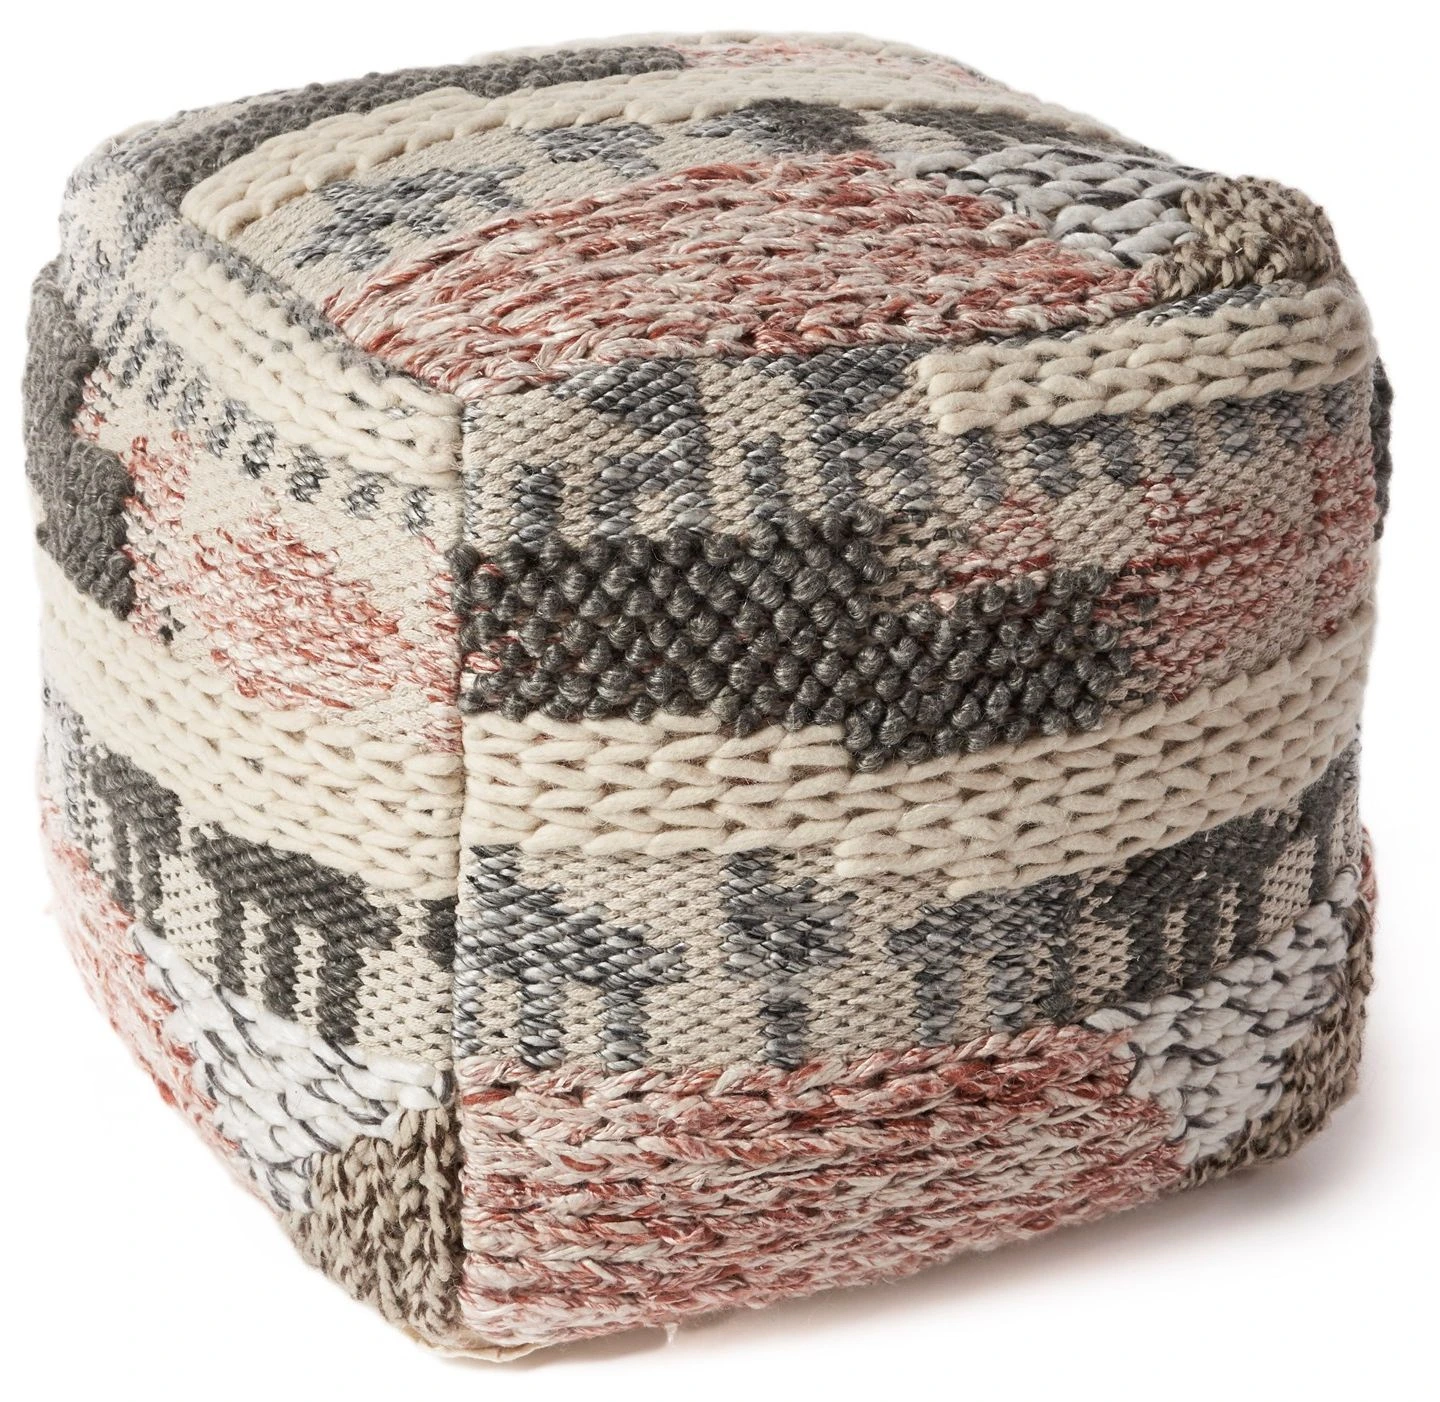 The KAS Rugs Soho Oasis collection pouf 